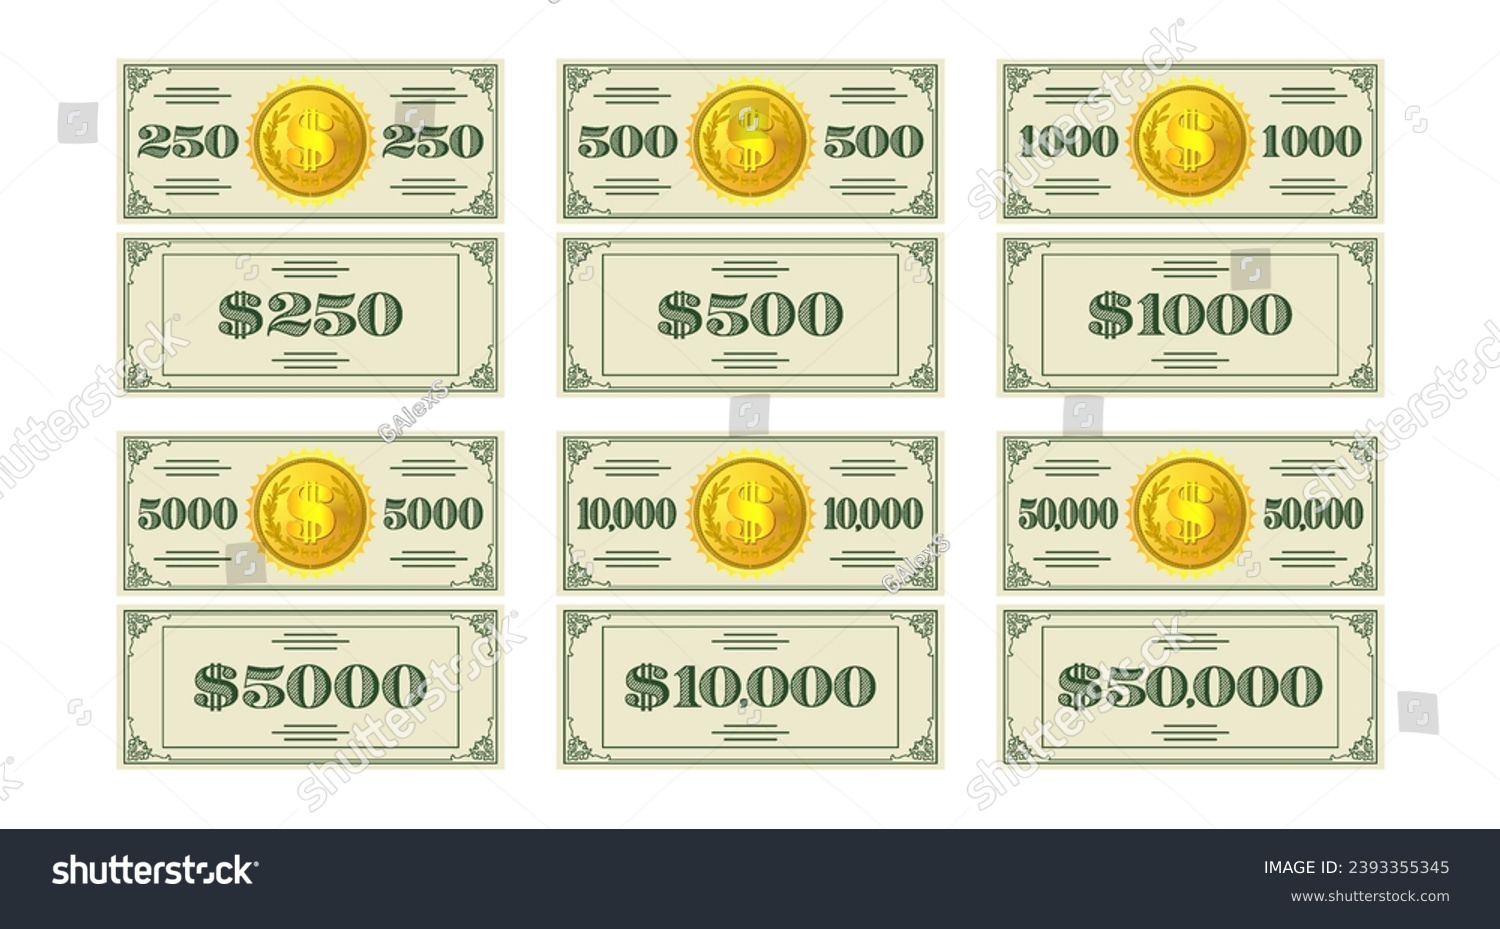 SVG of Vector set of banknotes, flyers, coupons or vouchers in denominations of 250, 500, 1000, 5000, 10000 and 50000 dollars, with a gold coin in the center. Obverse and reverse of play money. Part 2 svg